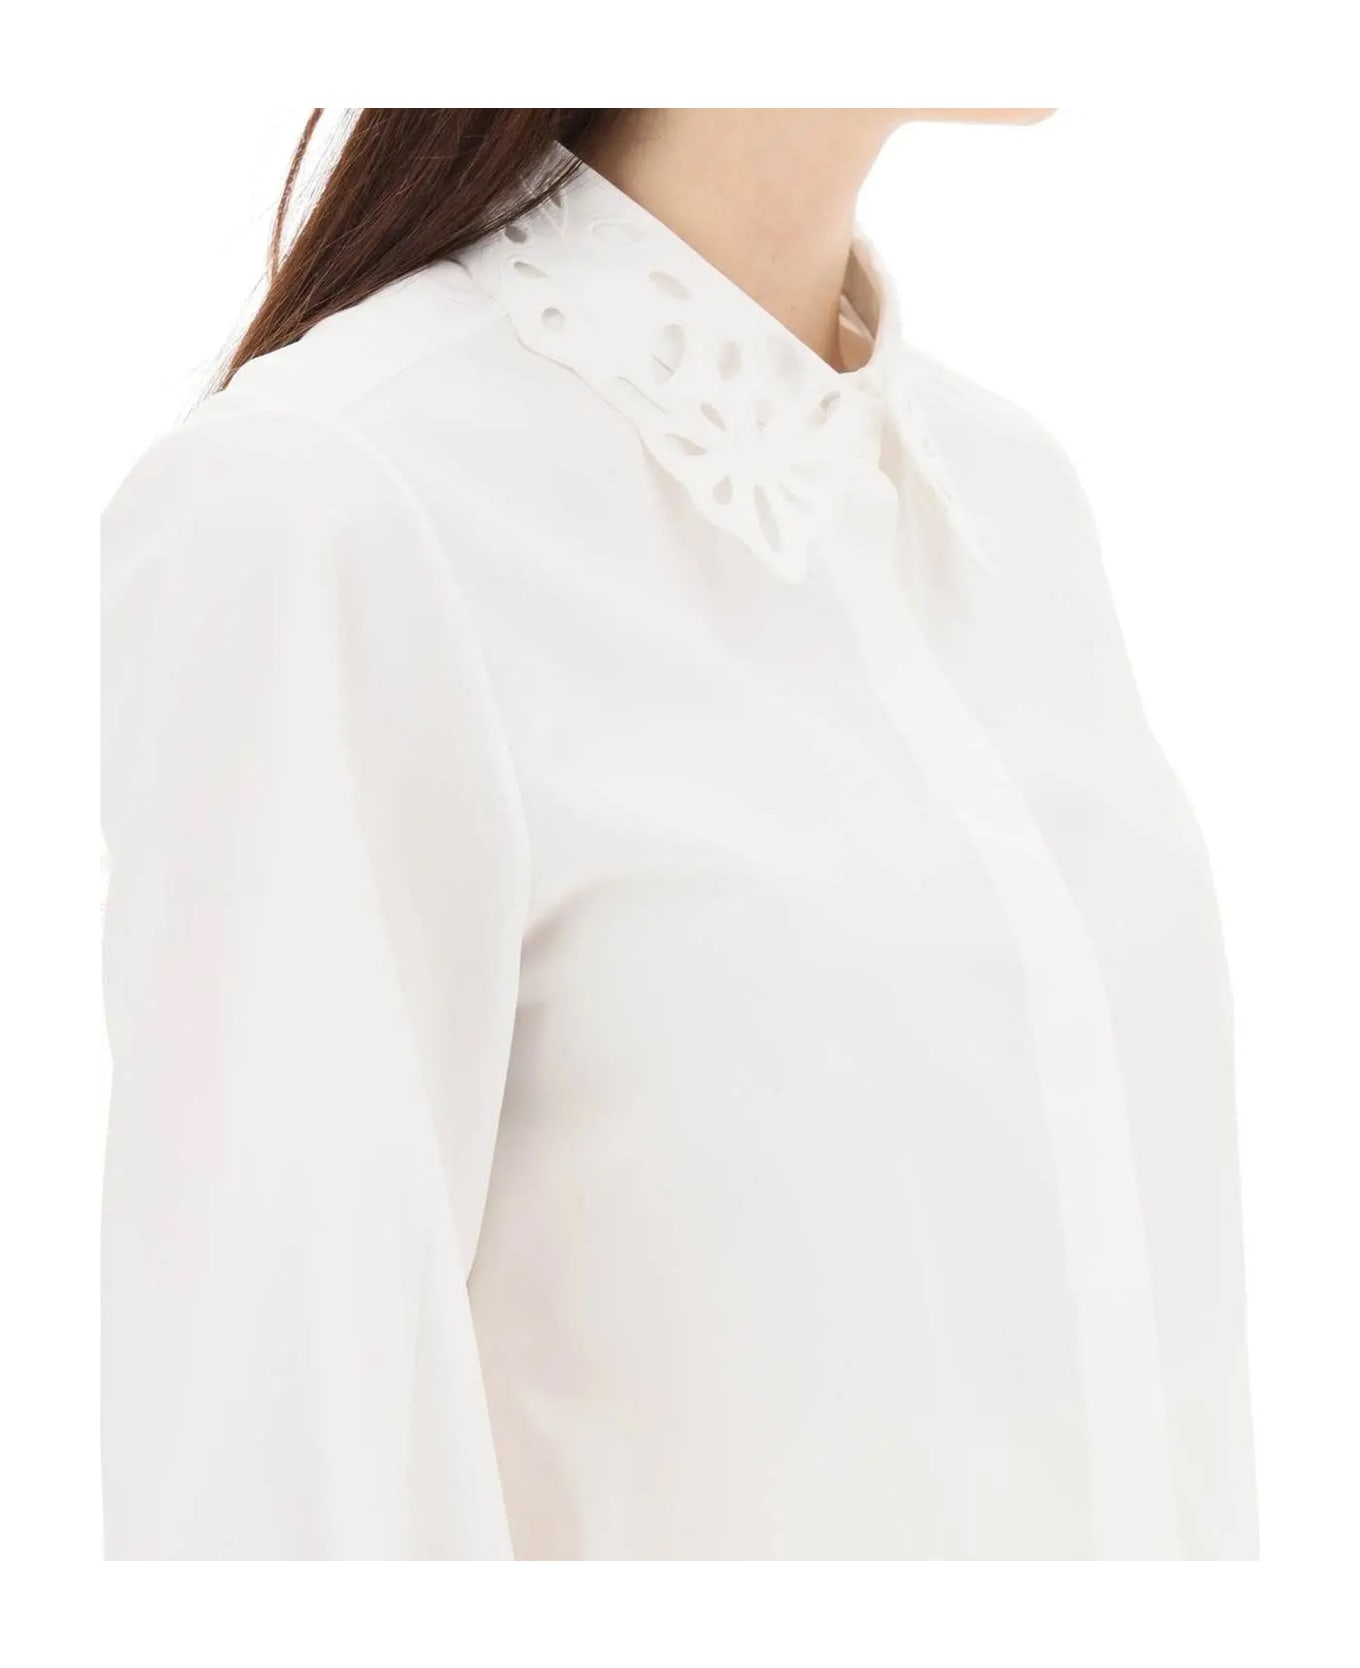 Chloé Cotton Embroidered Shirt - White